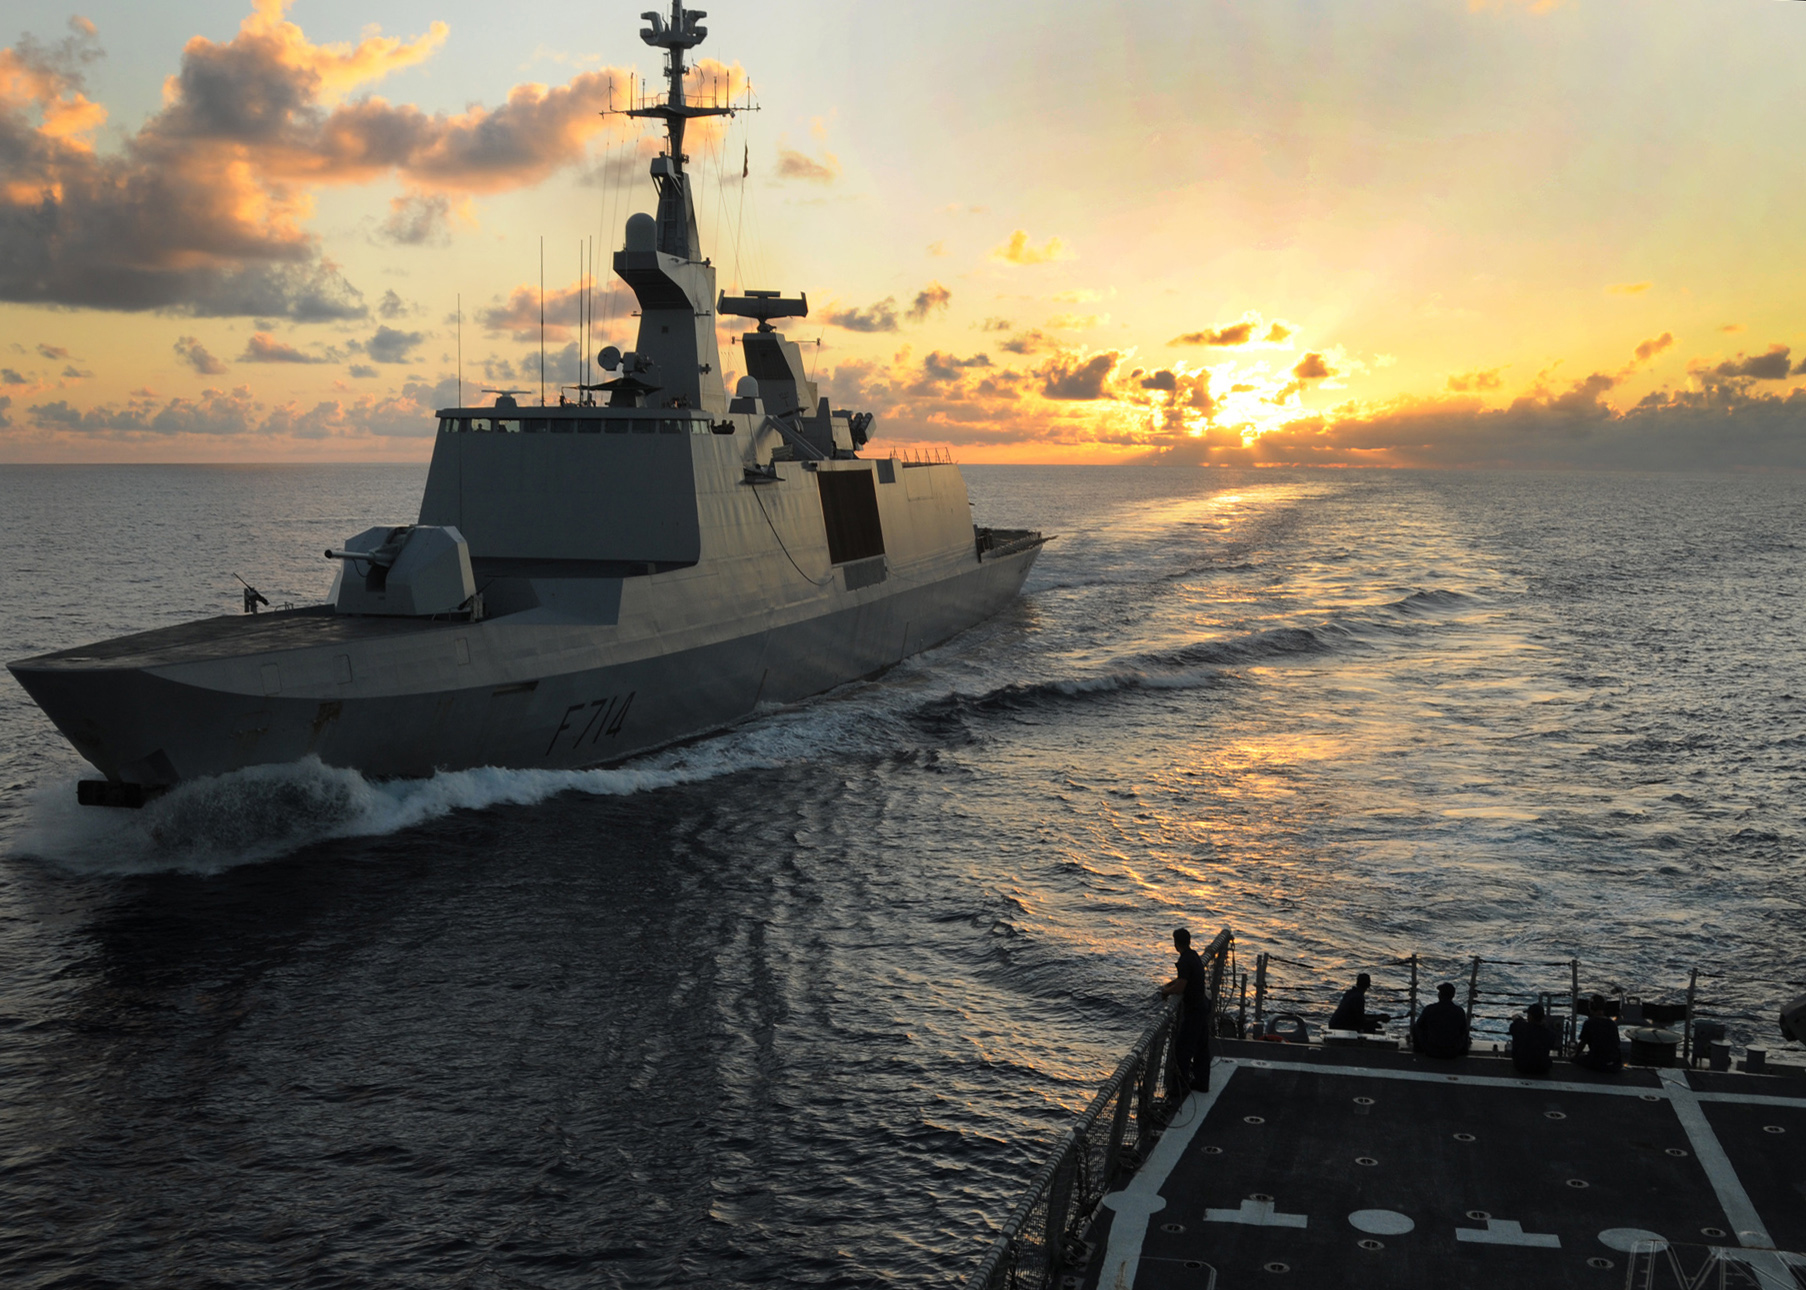 US_Navy_110314-N-5085J-072_French_navy_La_Fayette-class_frigate_FS_Guepratte_(F714)_prepares_to_come_alongside_the_guided-missile_frigate_USS_Steph.jpg